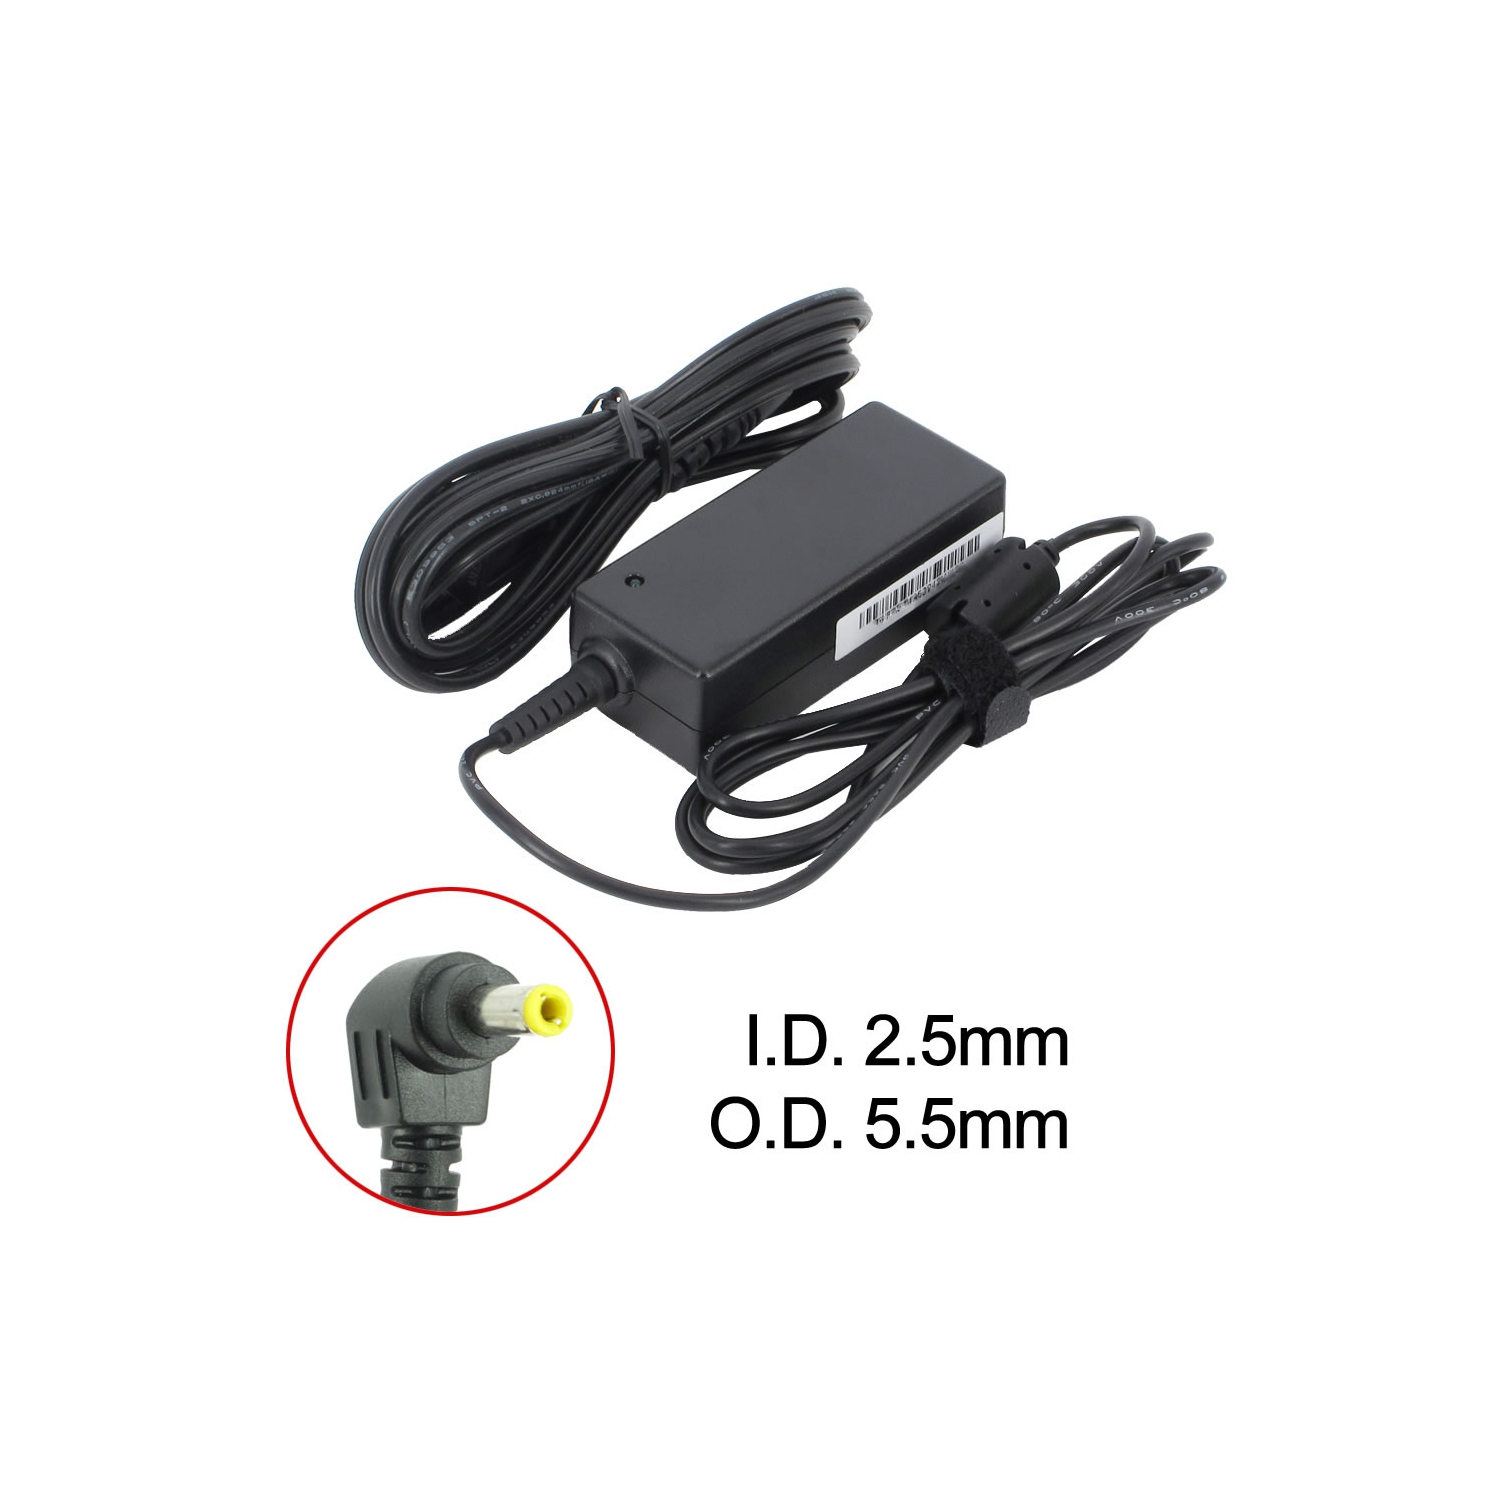 BattDepot: New Laptop AC Adapter for Lenovo 41R4449, ADP-40NH B, 31038046, 41R4447, 45K2201, 55Y9367, 57Y6367